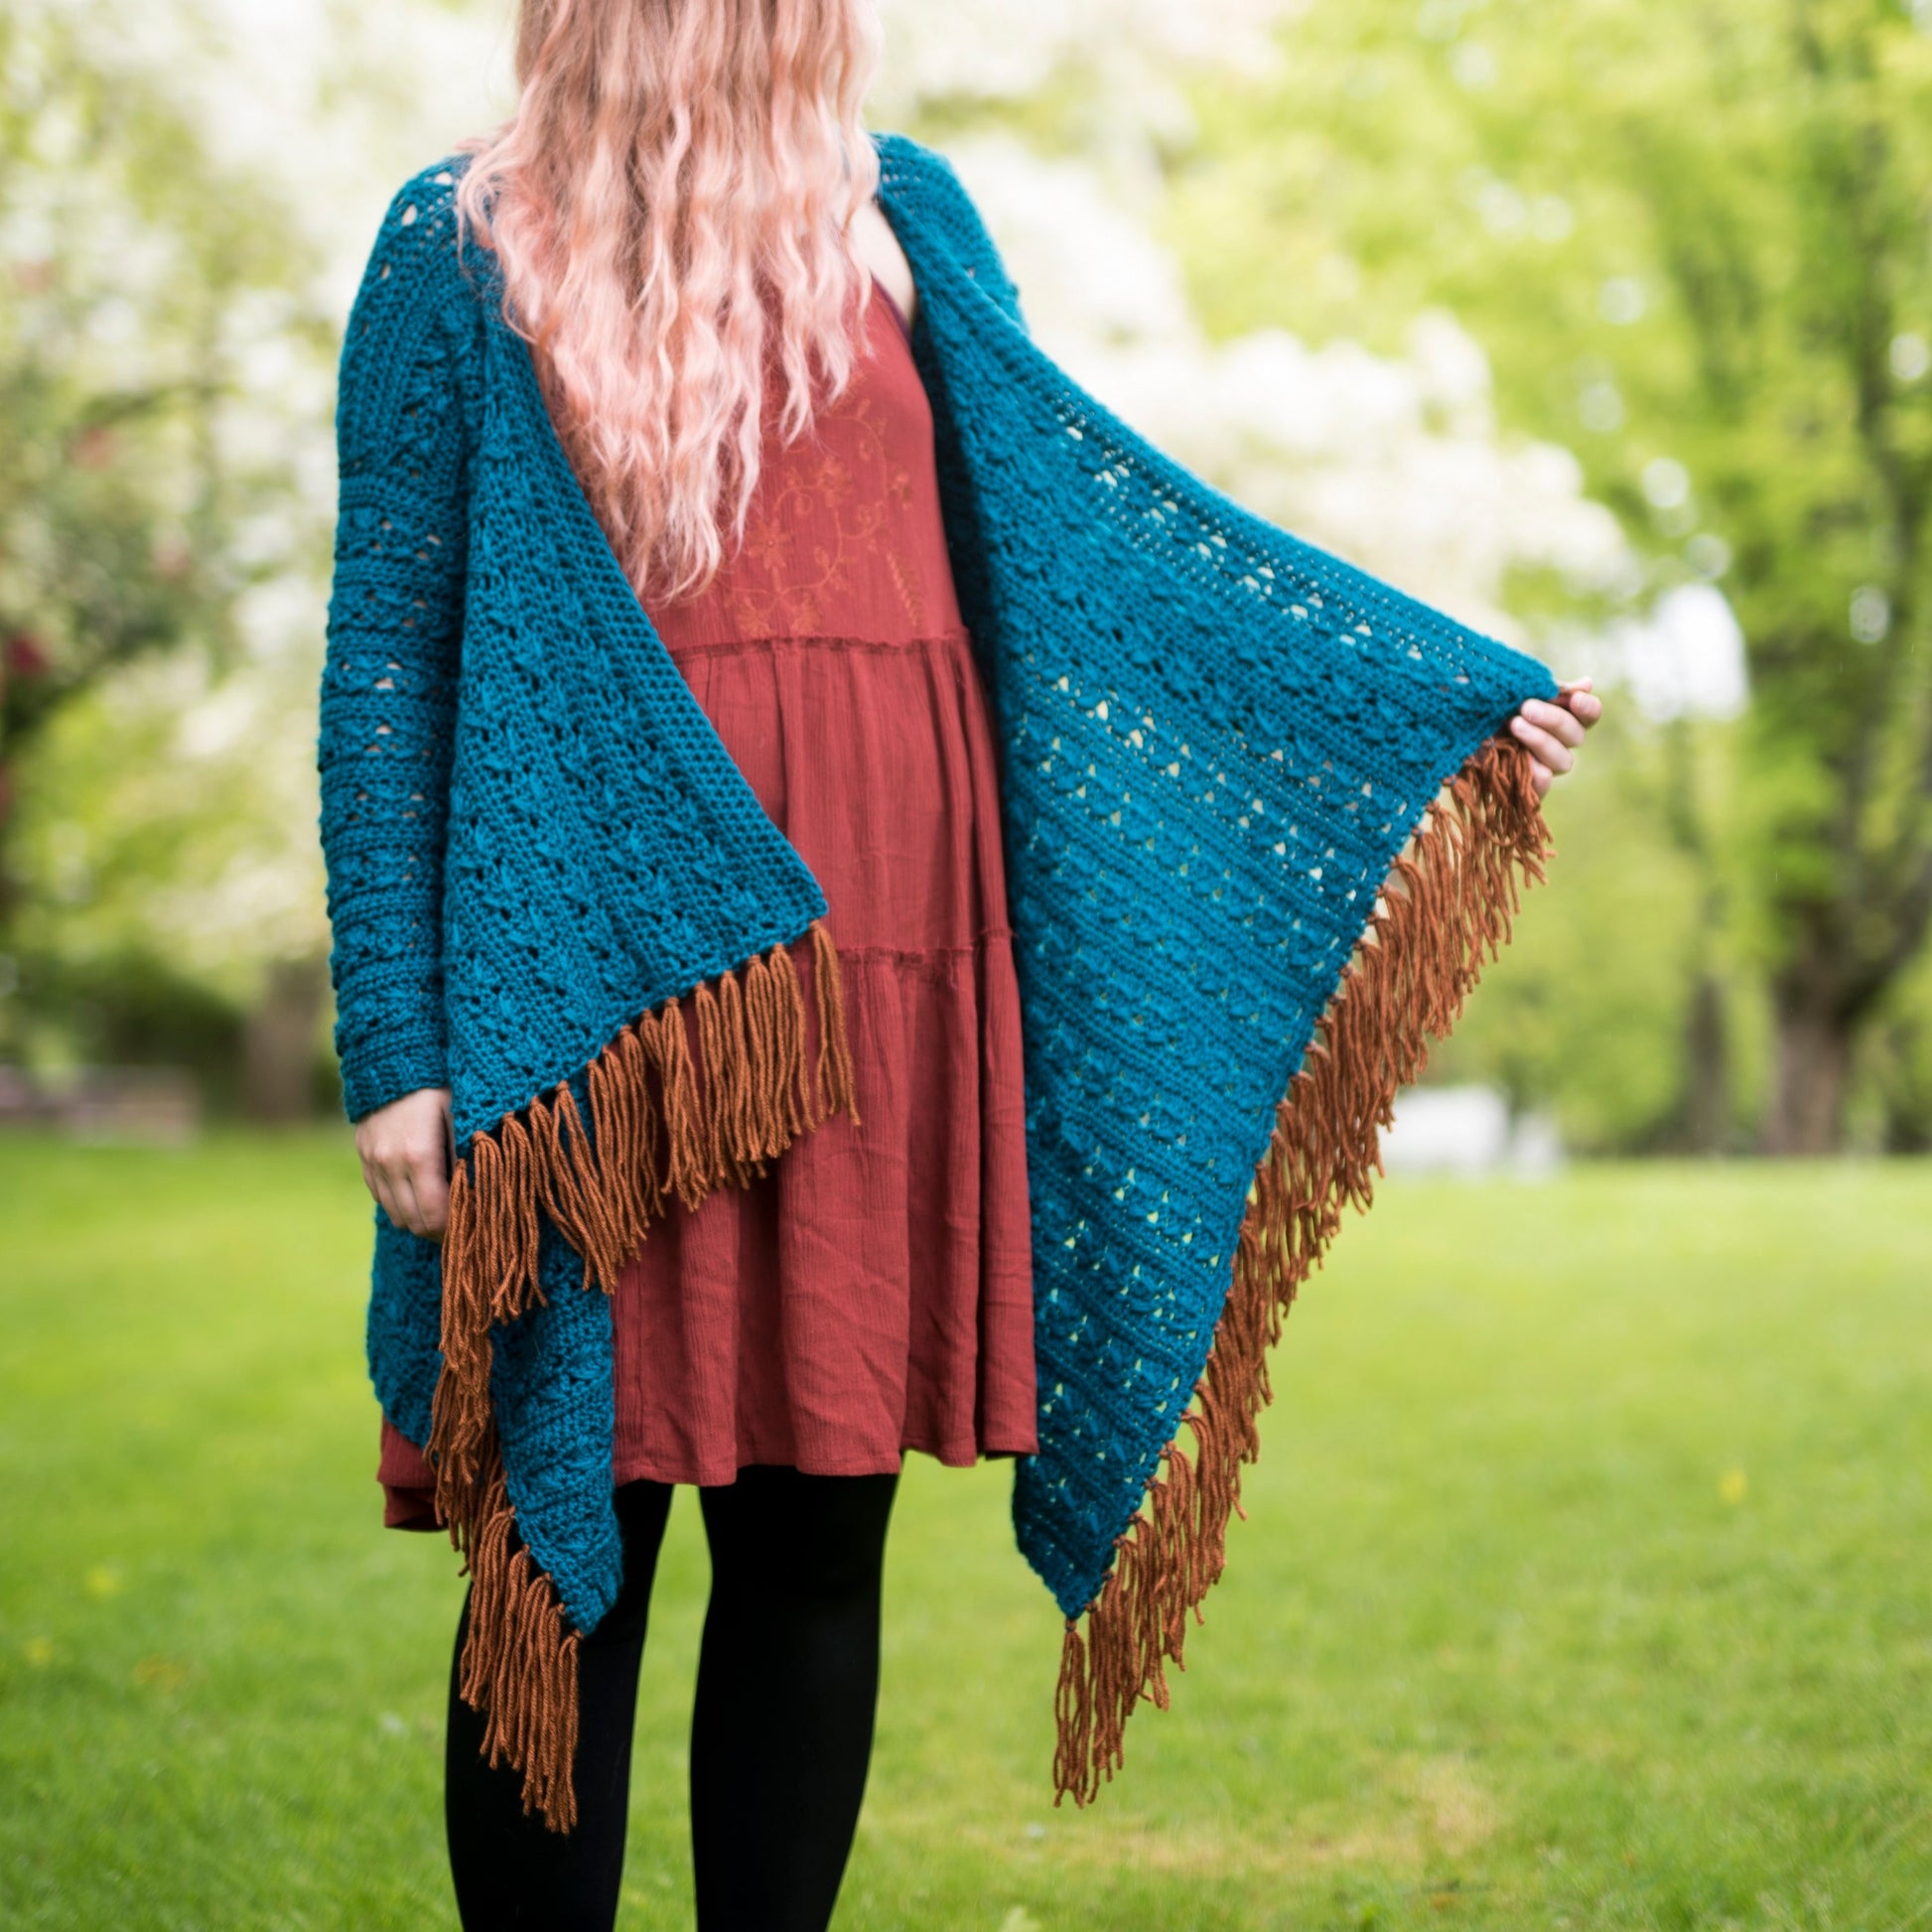 Crochet Pattern: The Kingfisher Cardigan – Made by Hailey Bailey